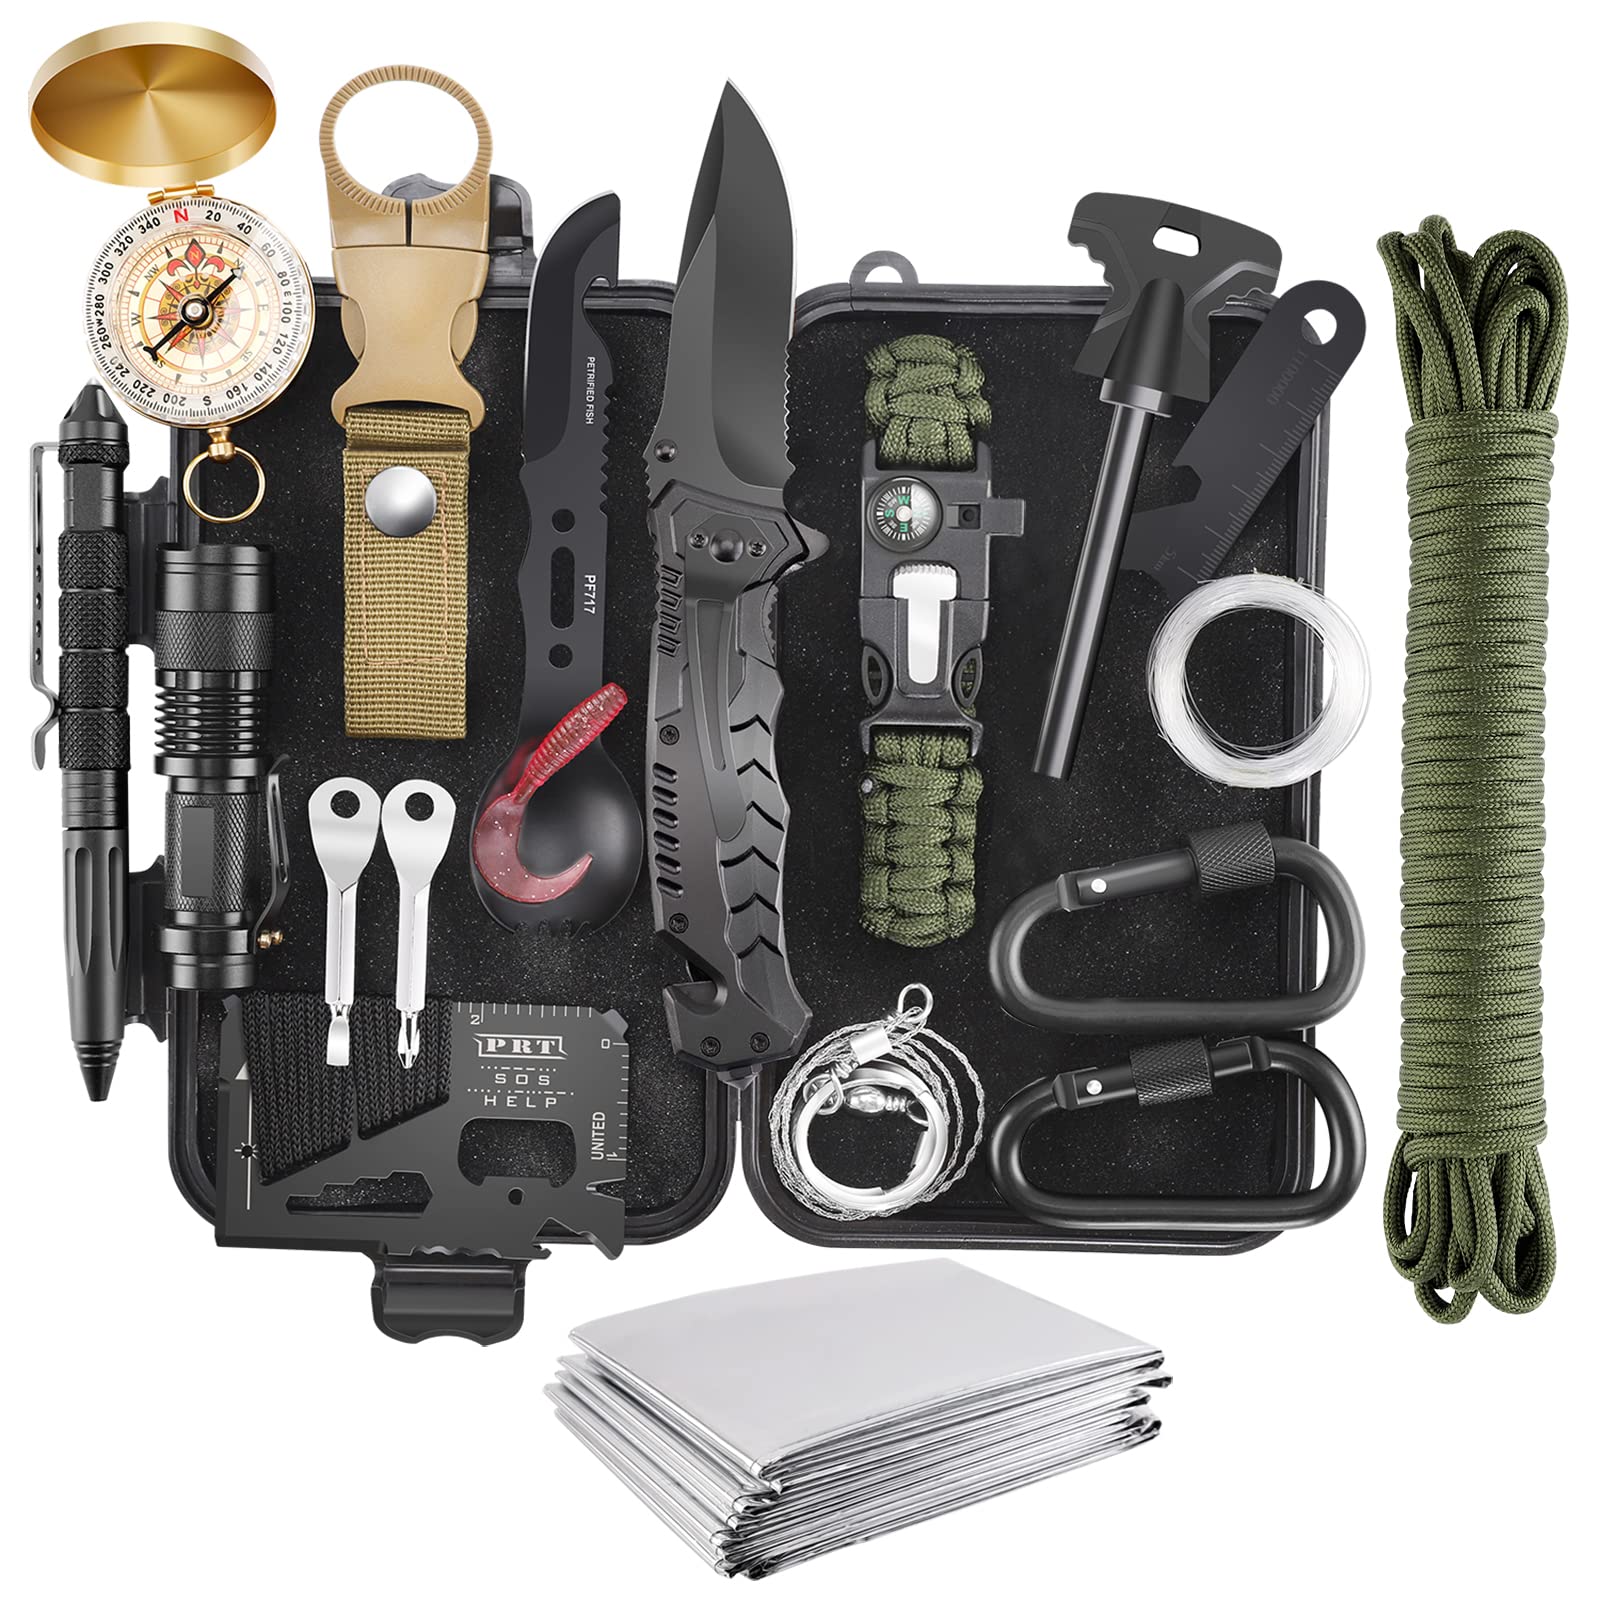 Emergency Survival Kit, 22 in 1 Professional Survival Gear Equipment Tools  First Aid Supplies for SOS Emergency Tactical Hiking Hunting Disaster  Camping Adventures